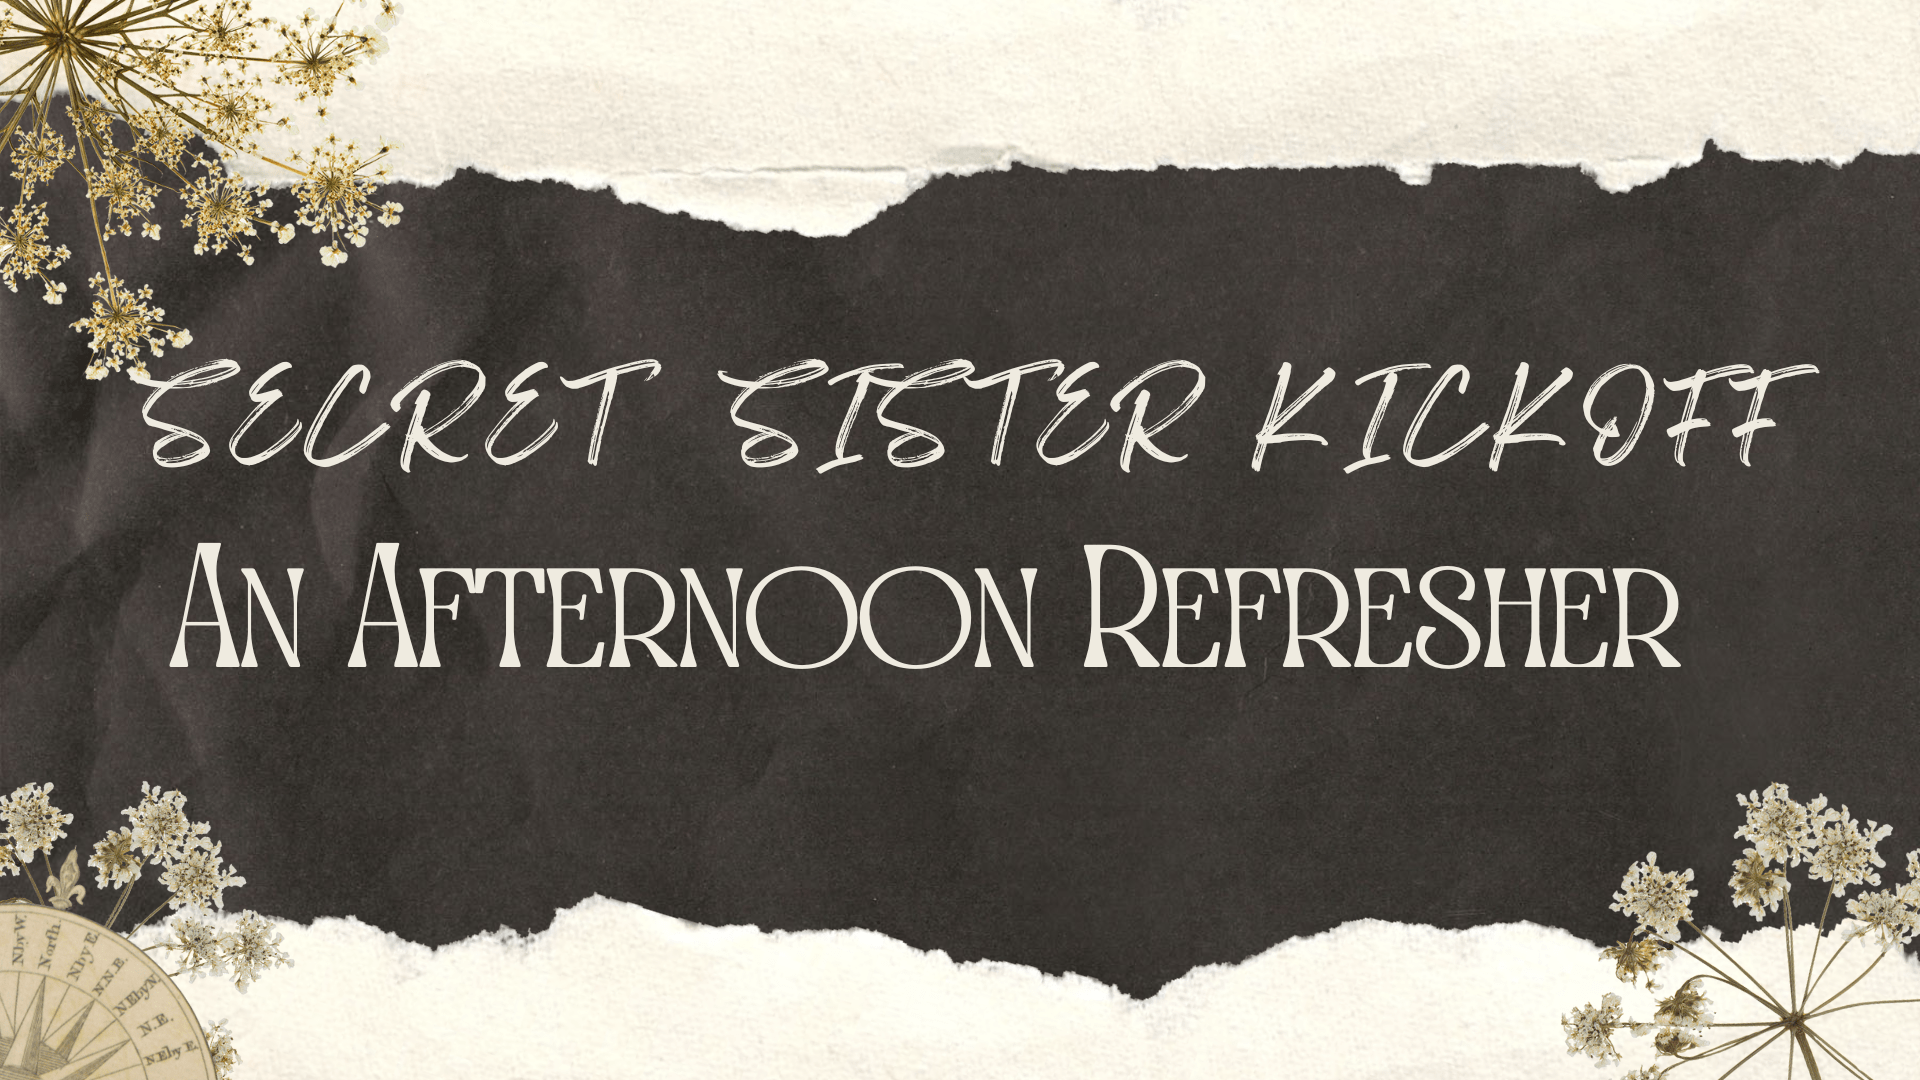 Secret Sister Kickoff: An Afternoon RefresHER